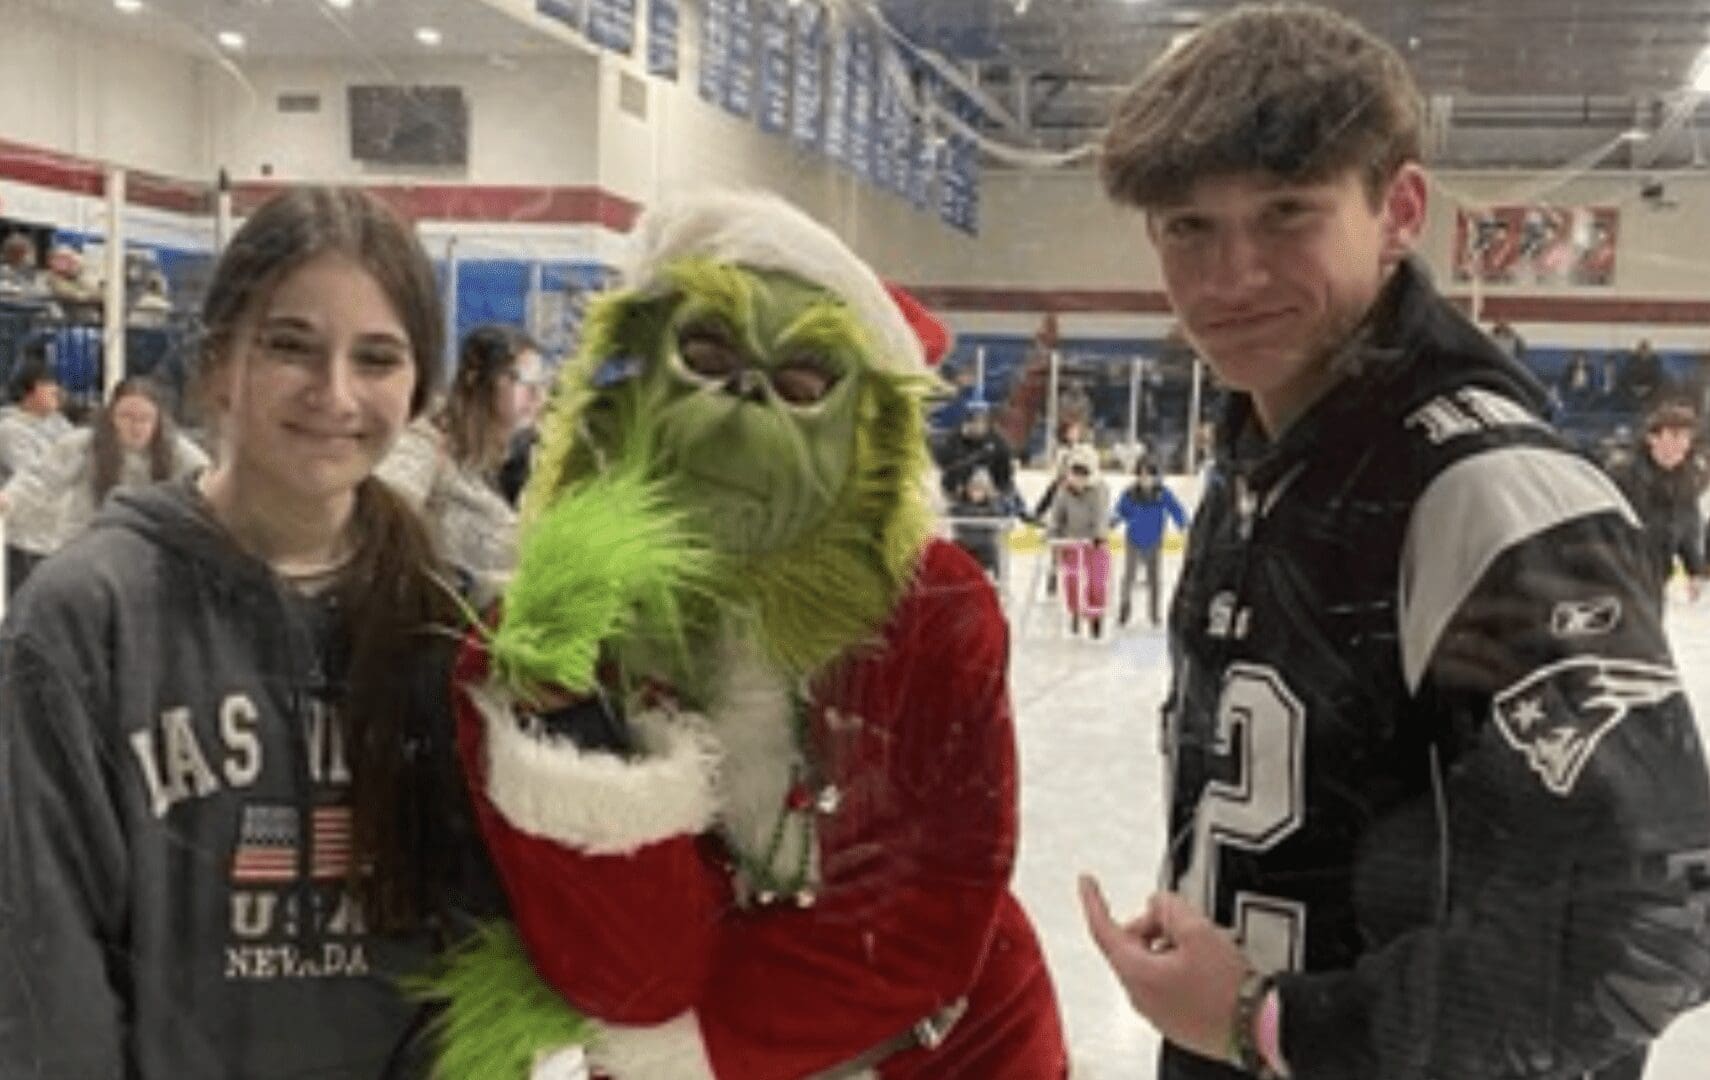 A group of people posing with a santa claus mascot.